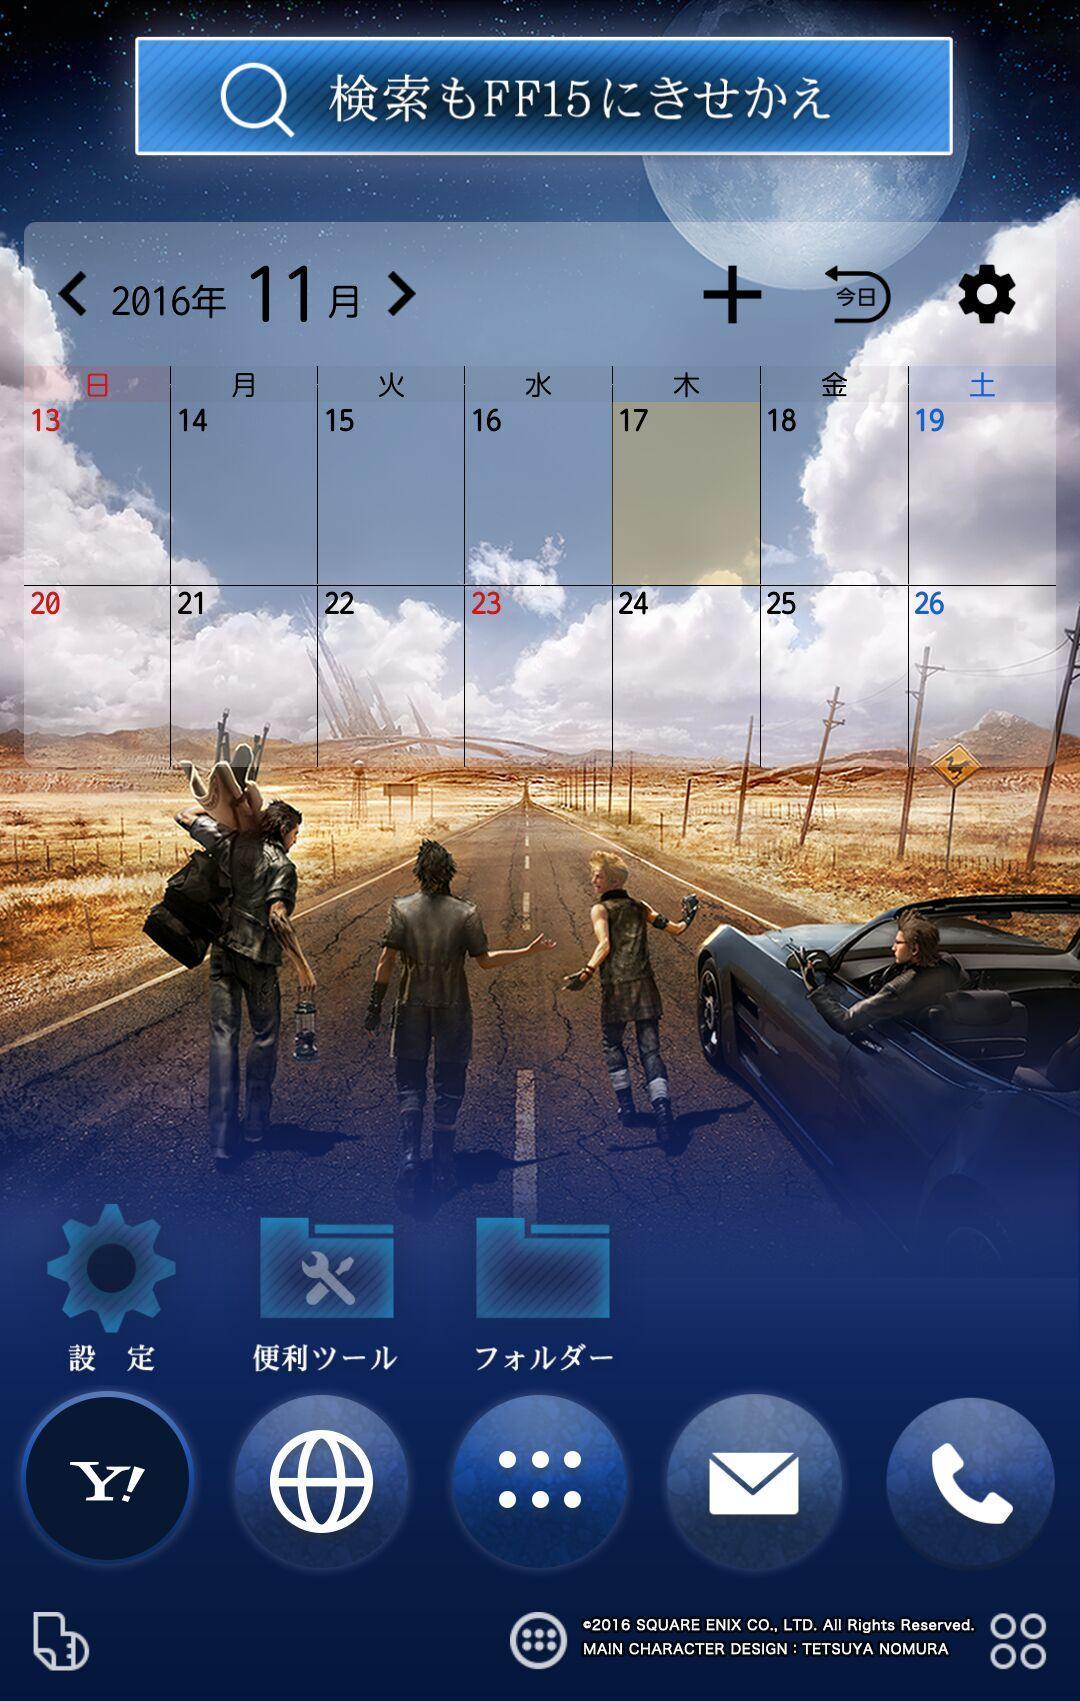 Final Fantasy Xv Ff15 壁紙きせかえ For Android Apk Download